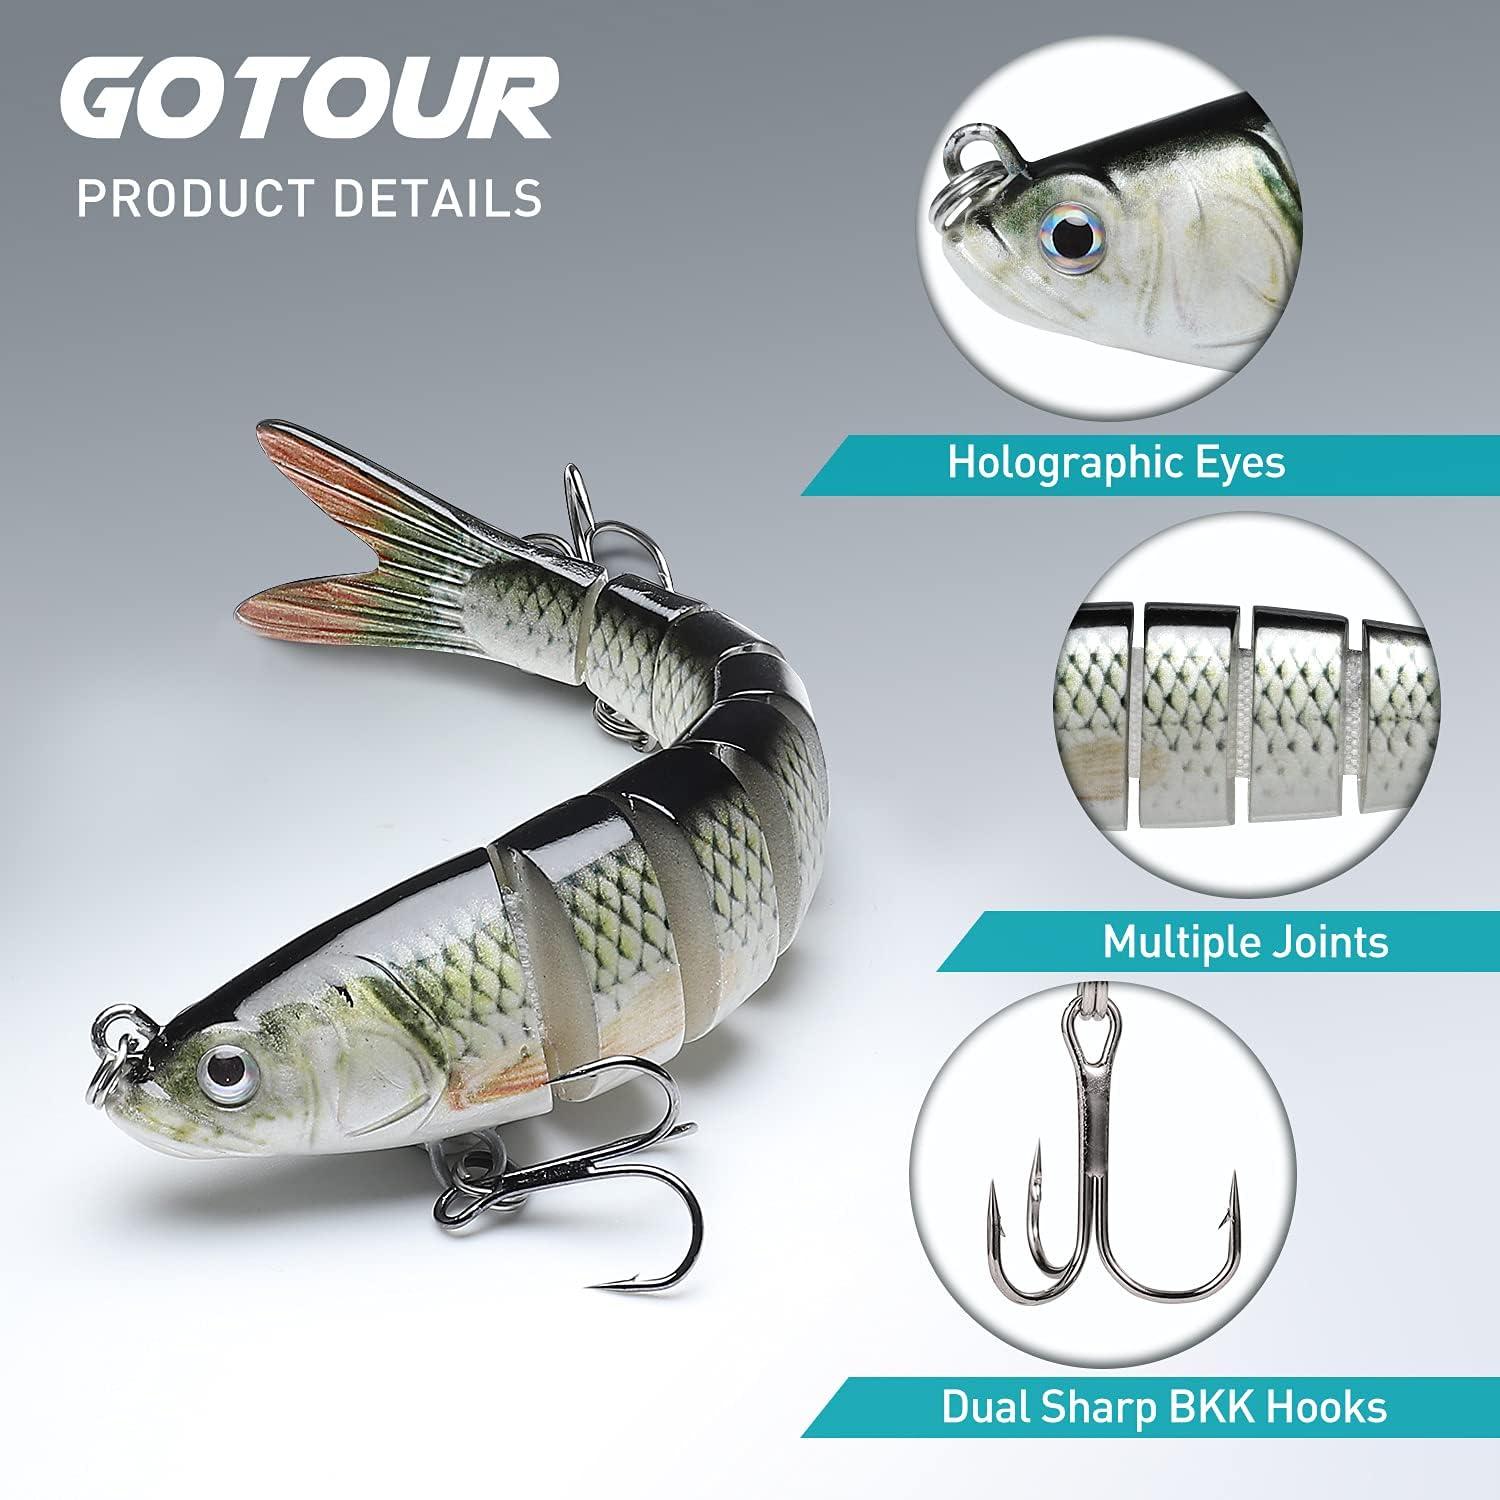  Fishing Lures, Full-Size Multi Jointed Swimbait Slow Sinking  Segmented Bass Fishing Lure, Swimming Fishing Lure Freshwater Or Saltwater  Perch Pike Walleye Bass Lures, Ideal Fishing Gifts